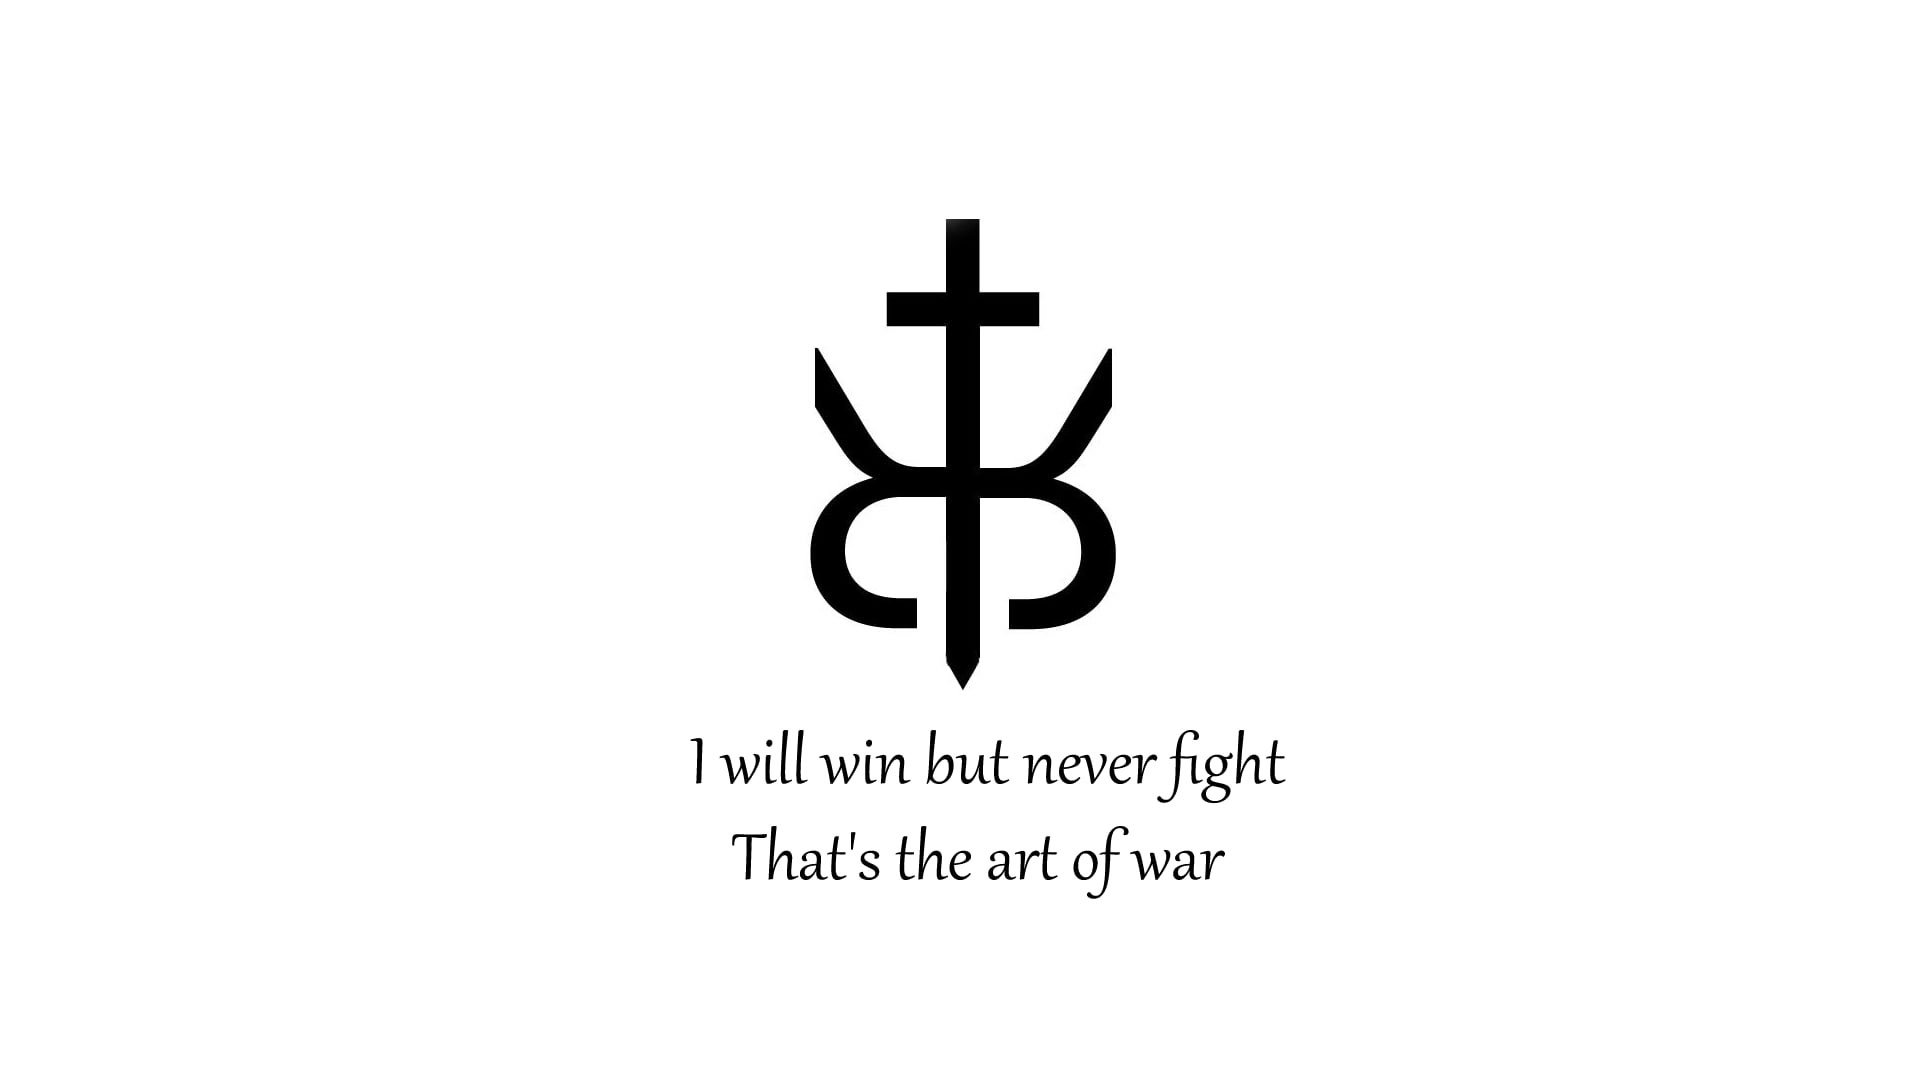 I will win but never fight wallpaper, That's the art of war